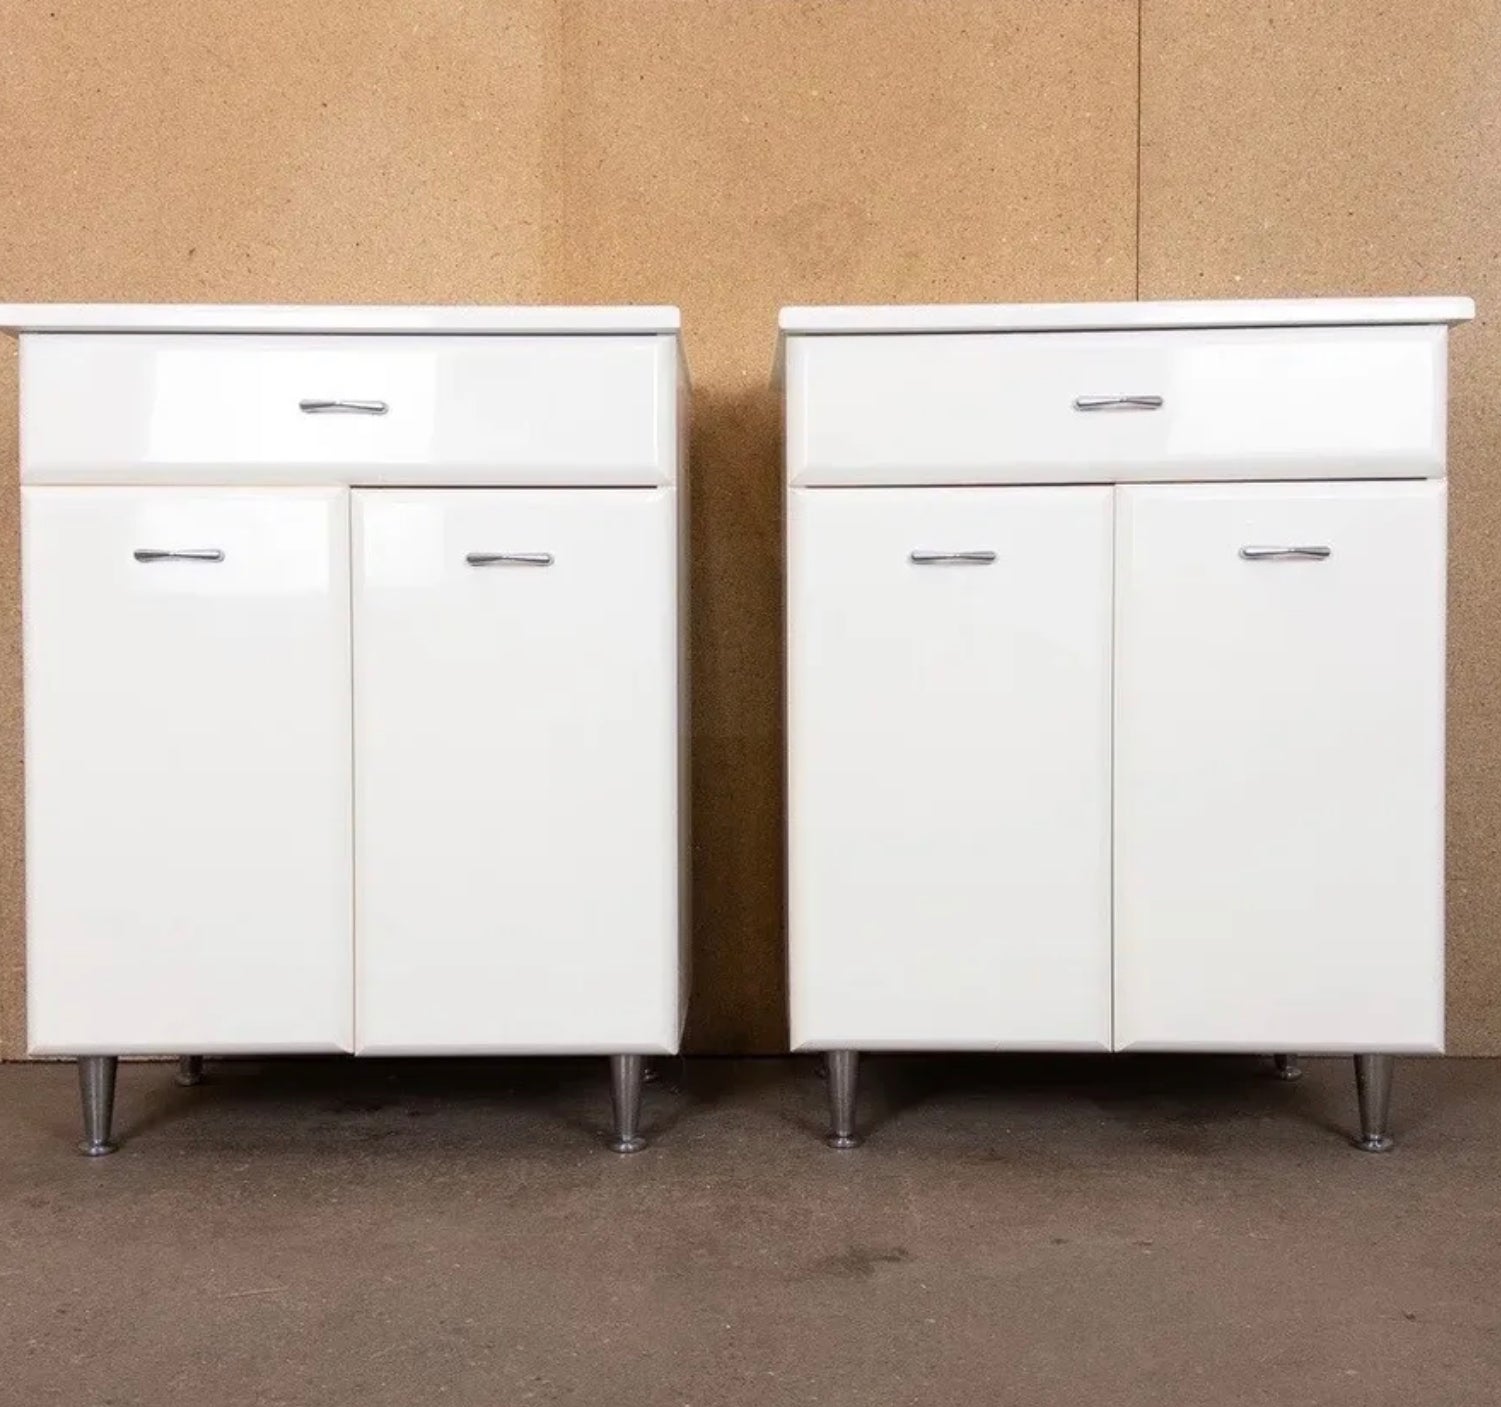 Vintage Style Pair of Bedside Tables with Drawers - High Gloss White - teakyfinders